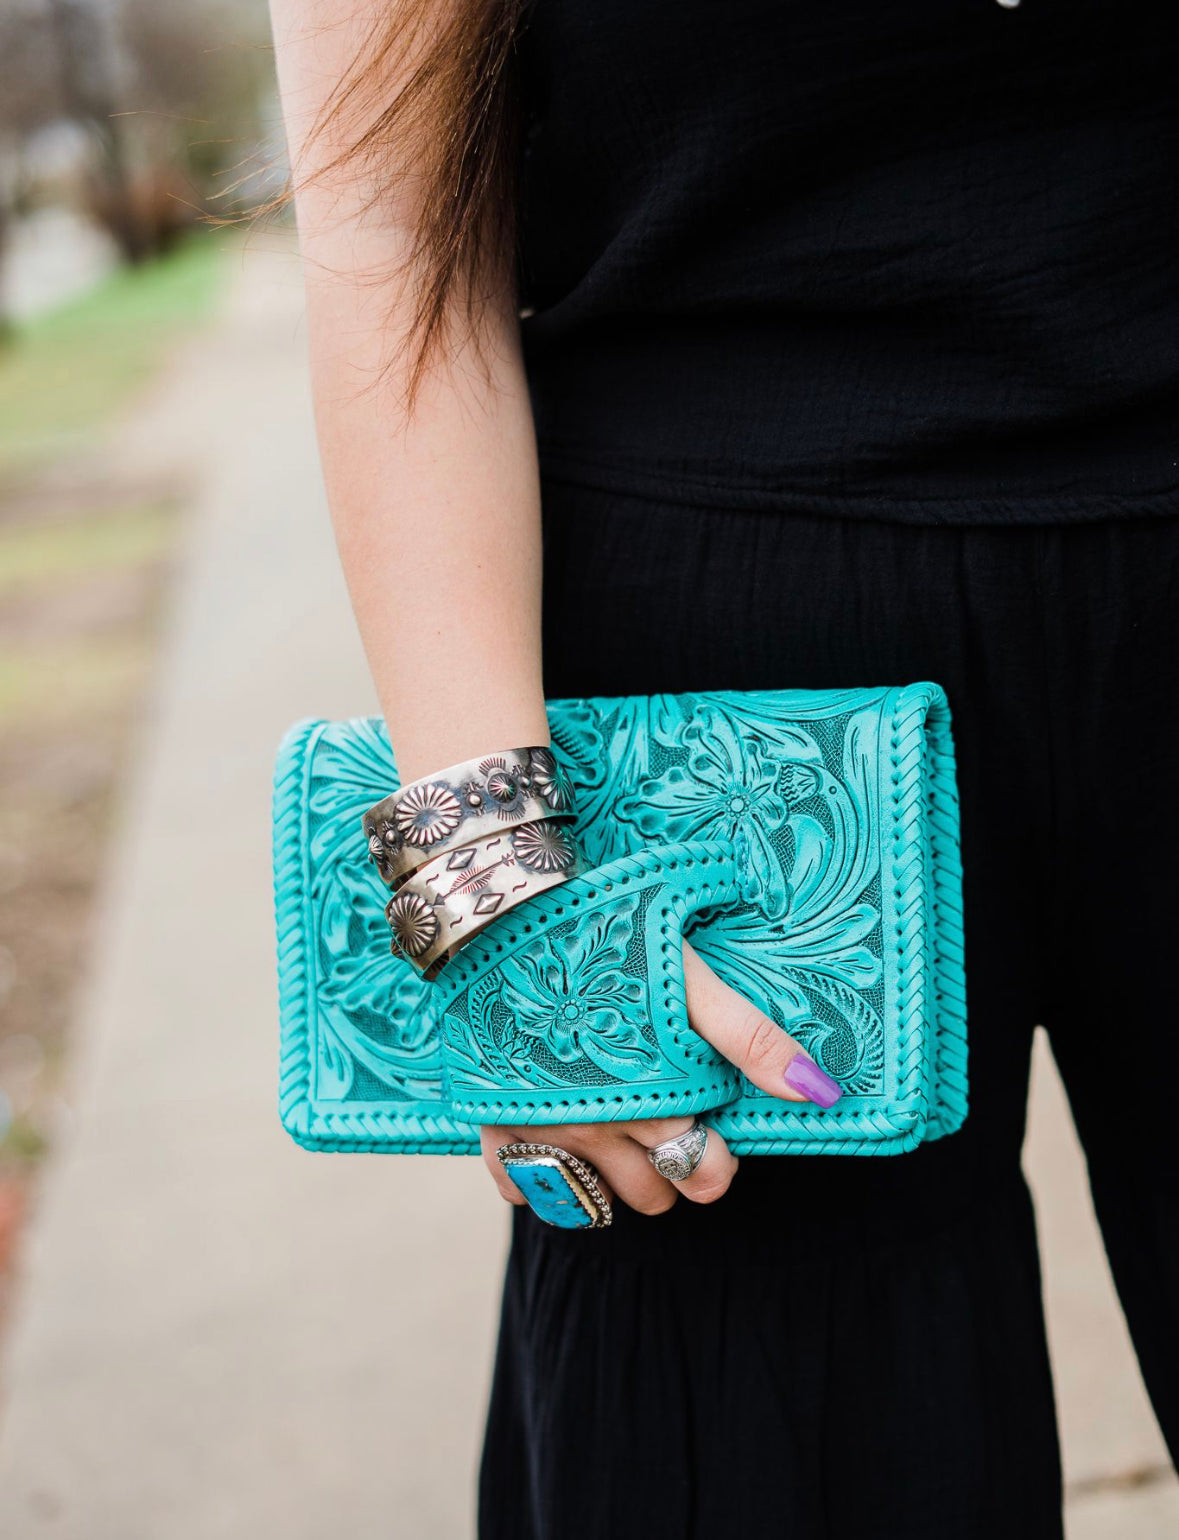 Sobre Chico Clutch in Turquoise – L Trading